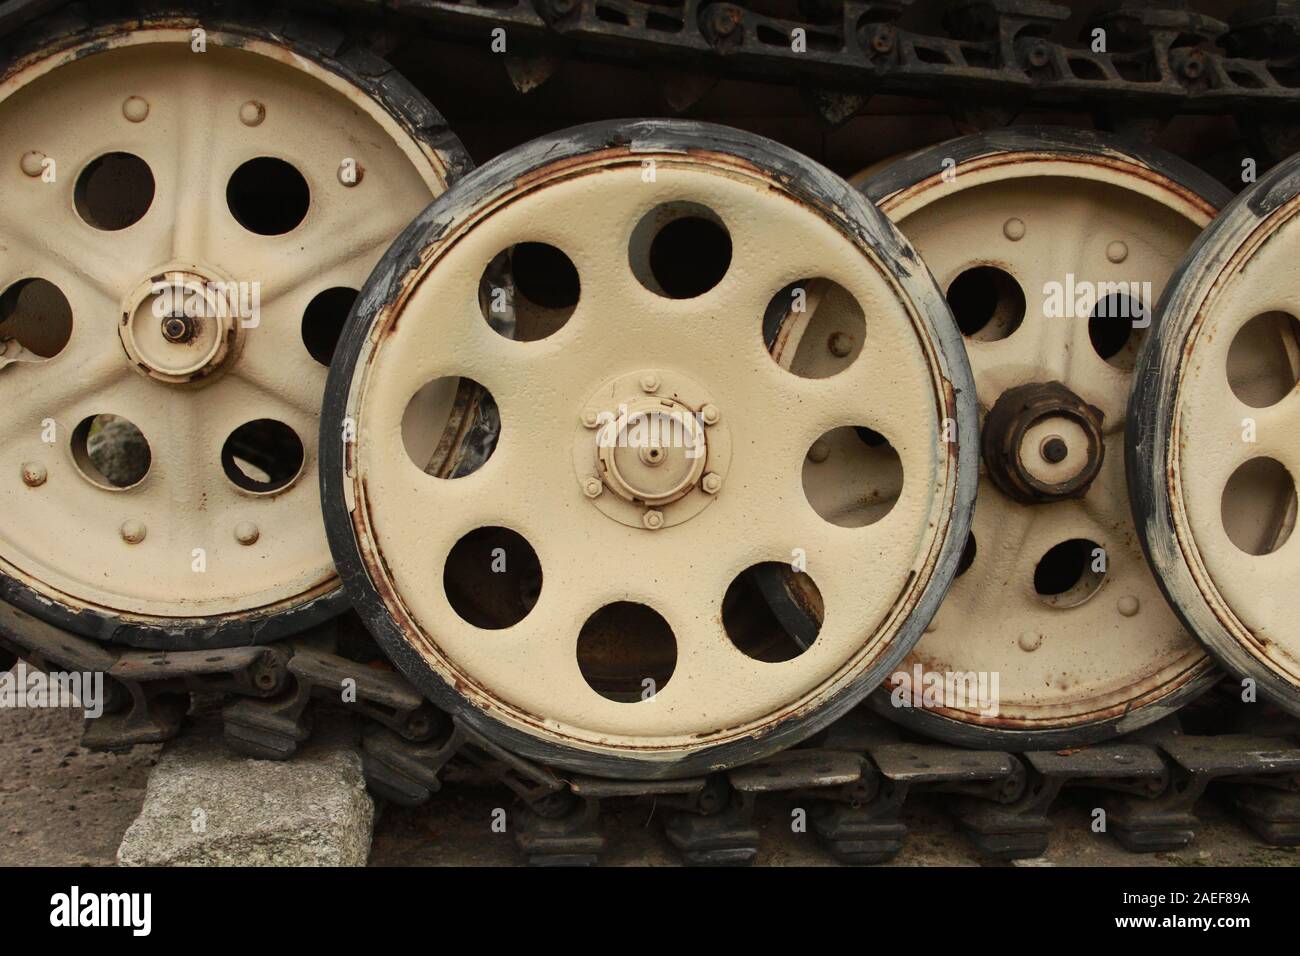 Close up of a tank's sprockets from World War Two in good condition. Retro transport and military technology concept. Stock Photo